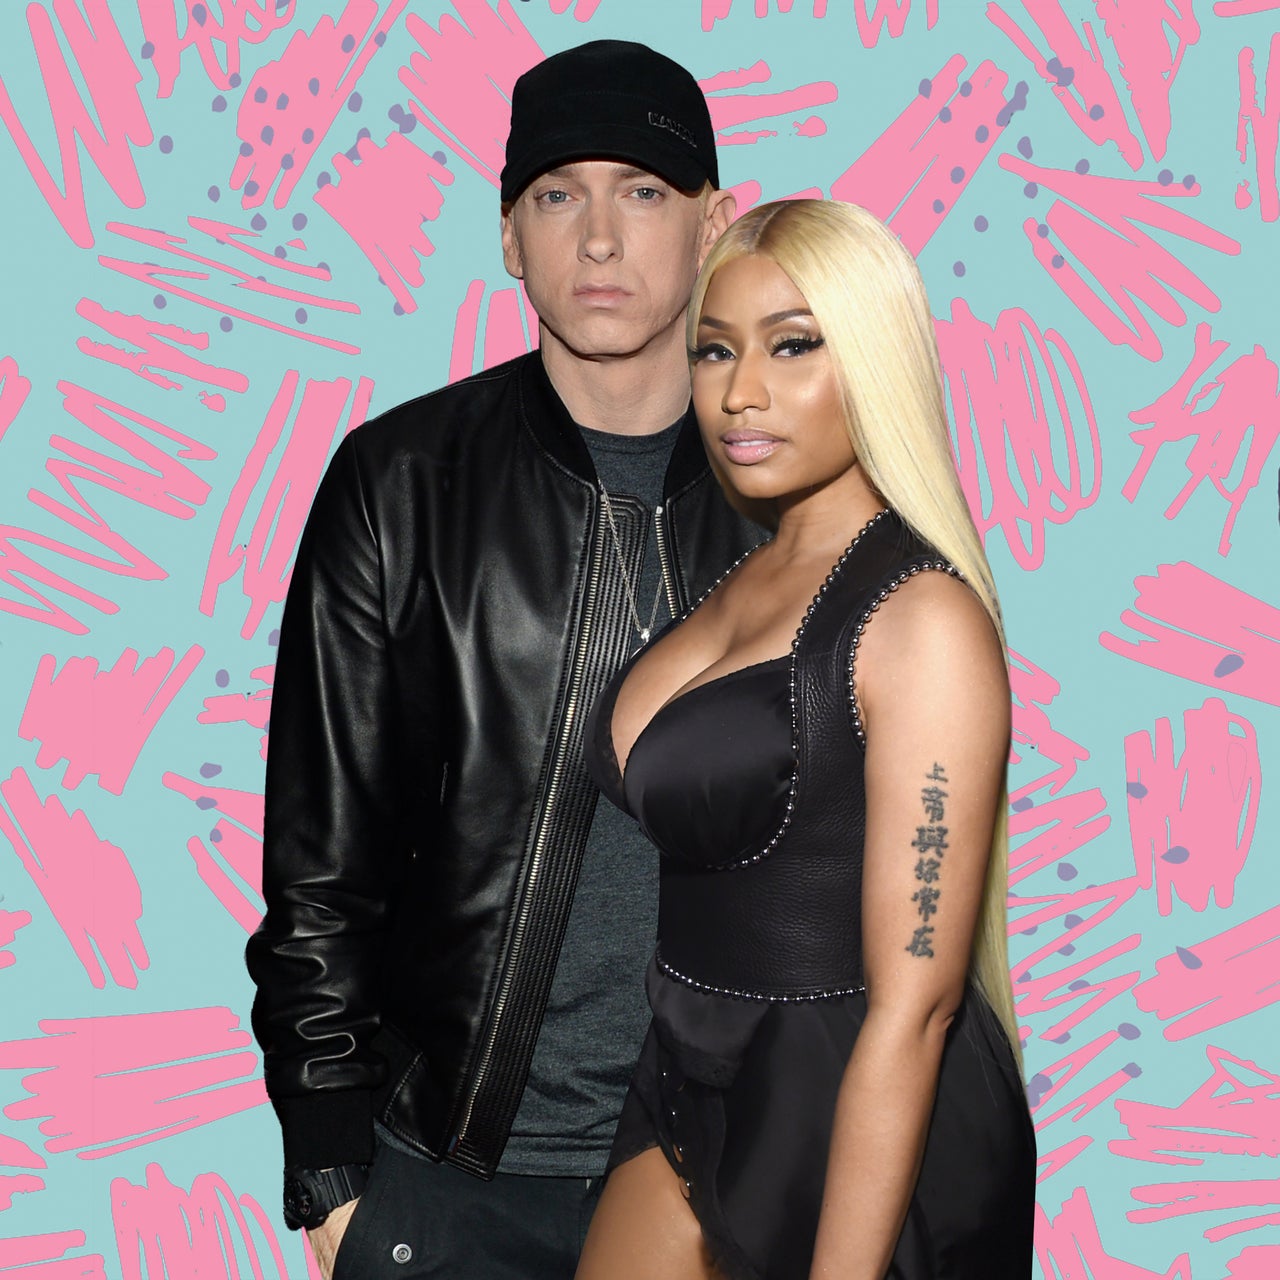 No, Nicki Minaj and Eminem Aren't Dating! But He's Open To It | Essence